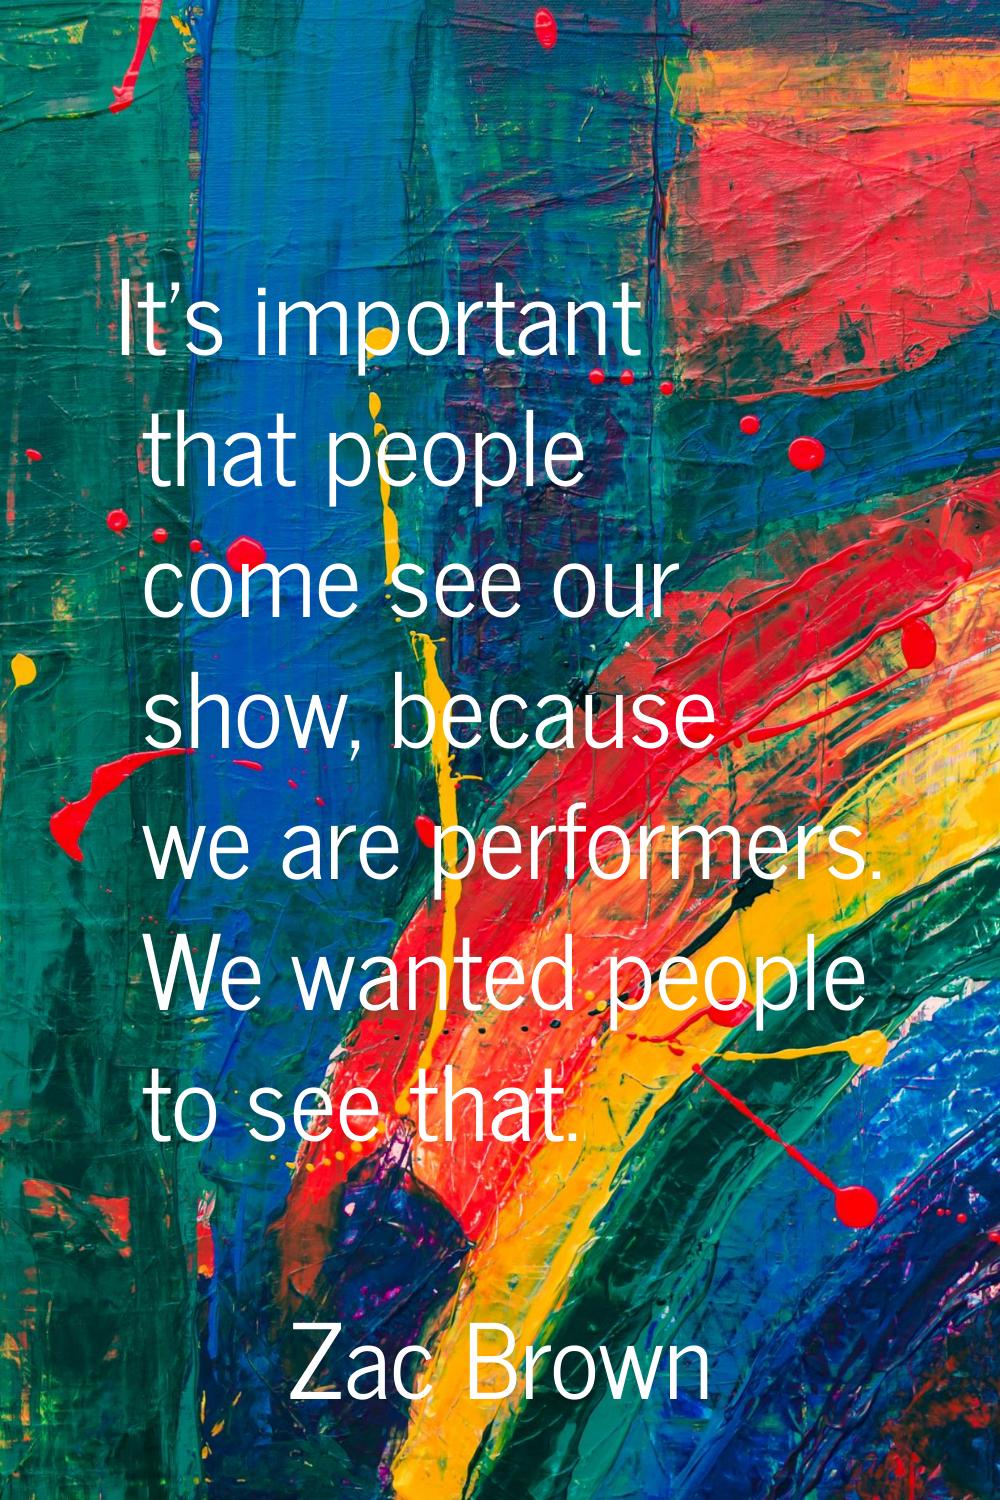 It's important that people come see our show, because we are performers. We wanted people to see th